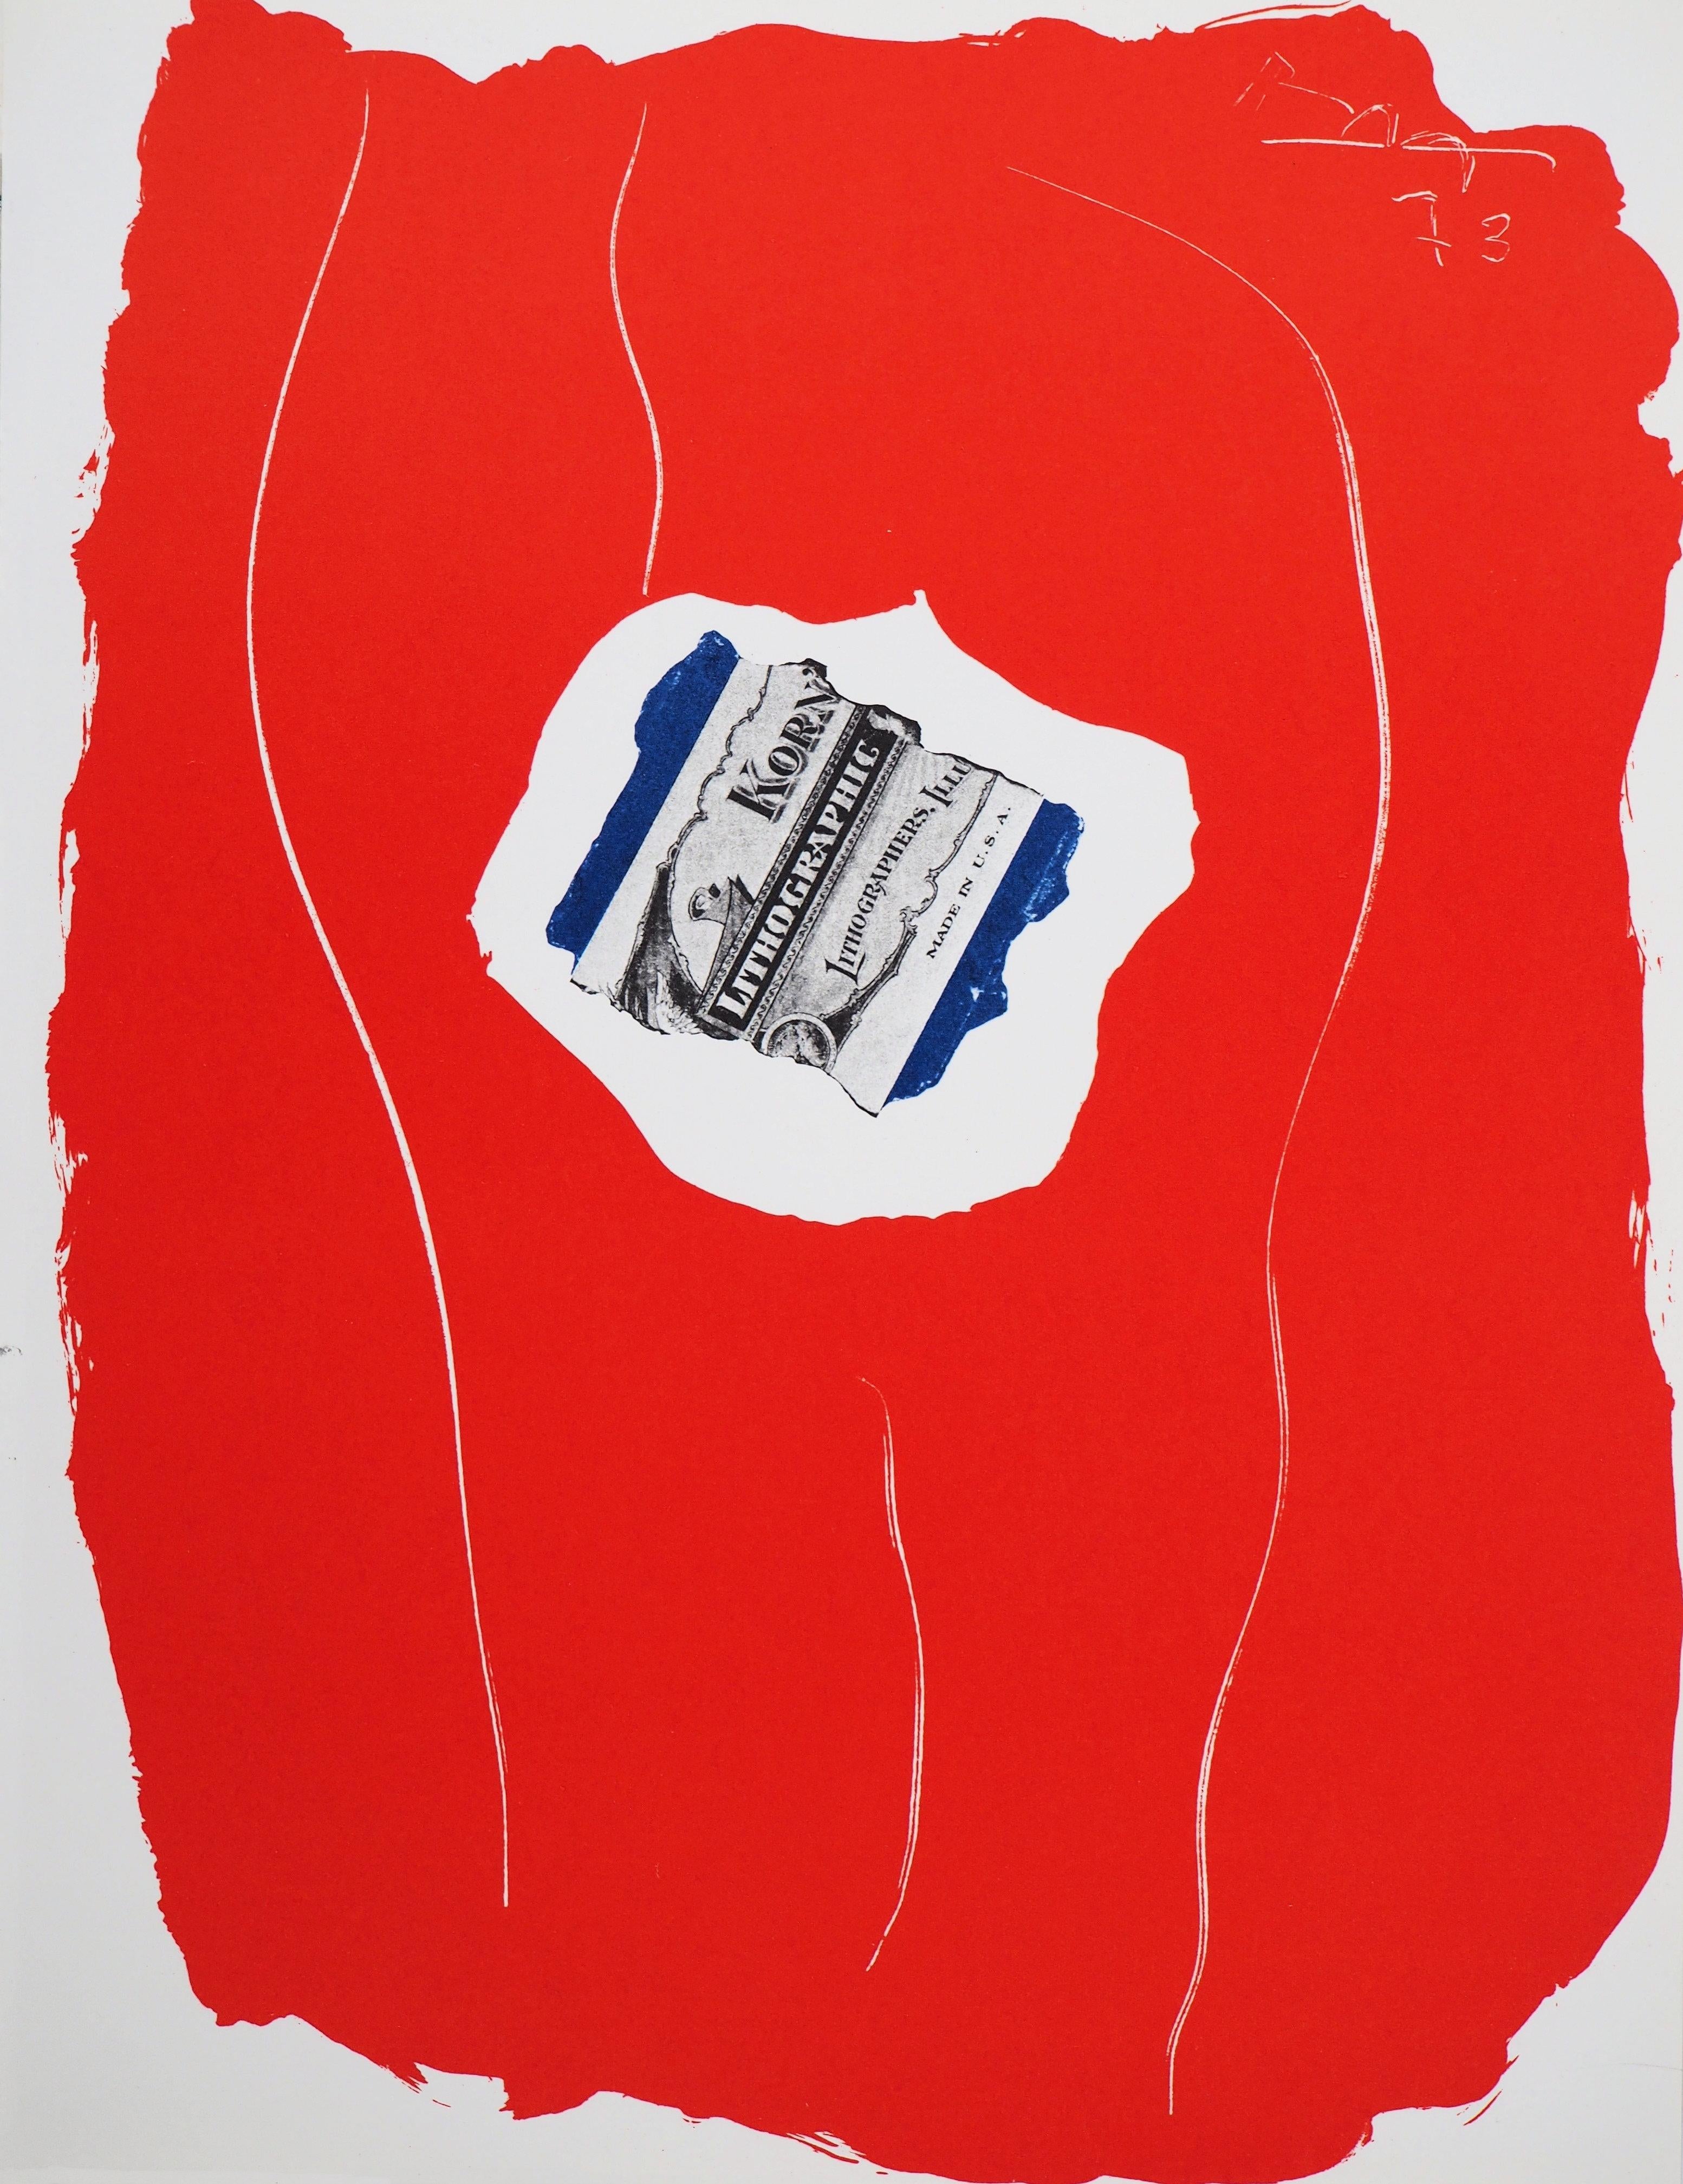 Abstract Print Robert Motherwell - Tricolore avec Dollar - Lithographie originale (Mourlot 1973)